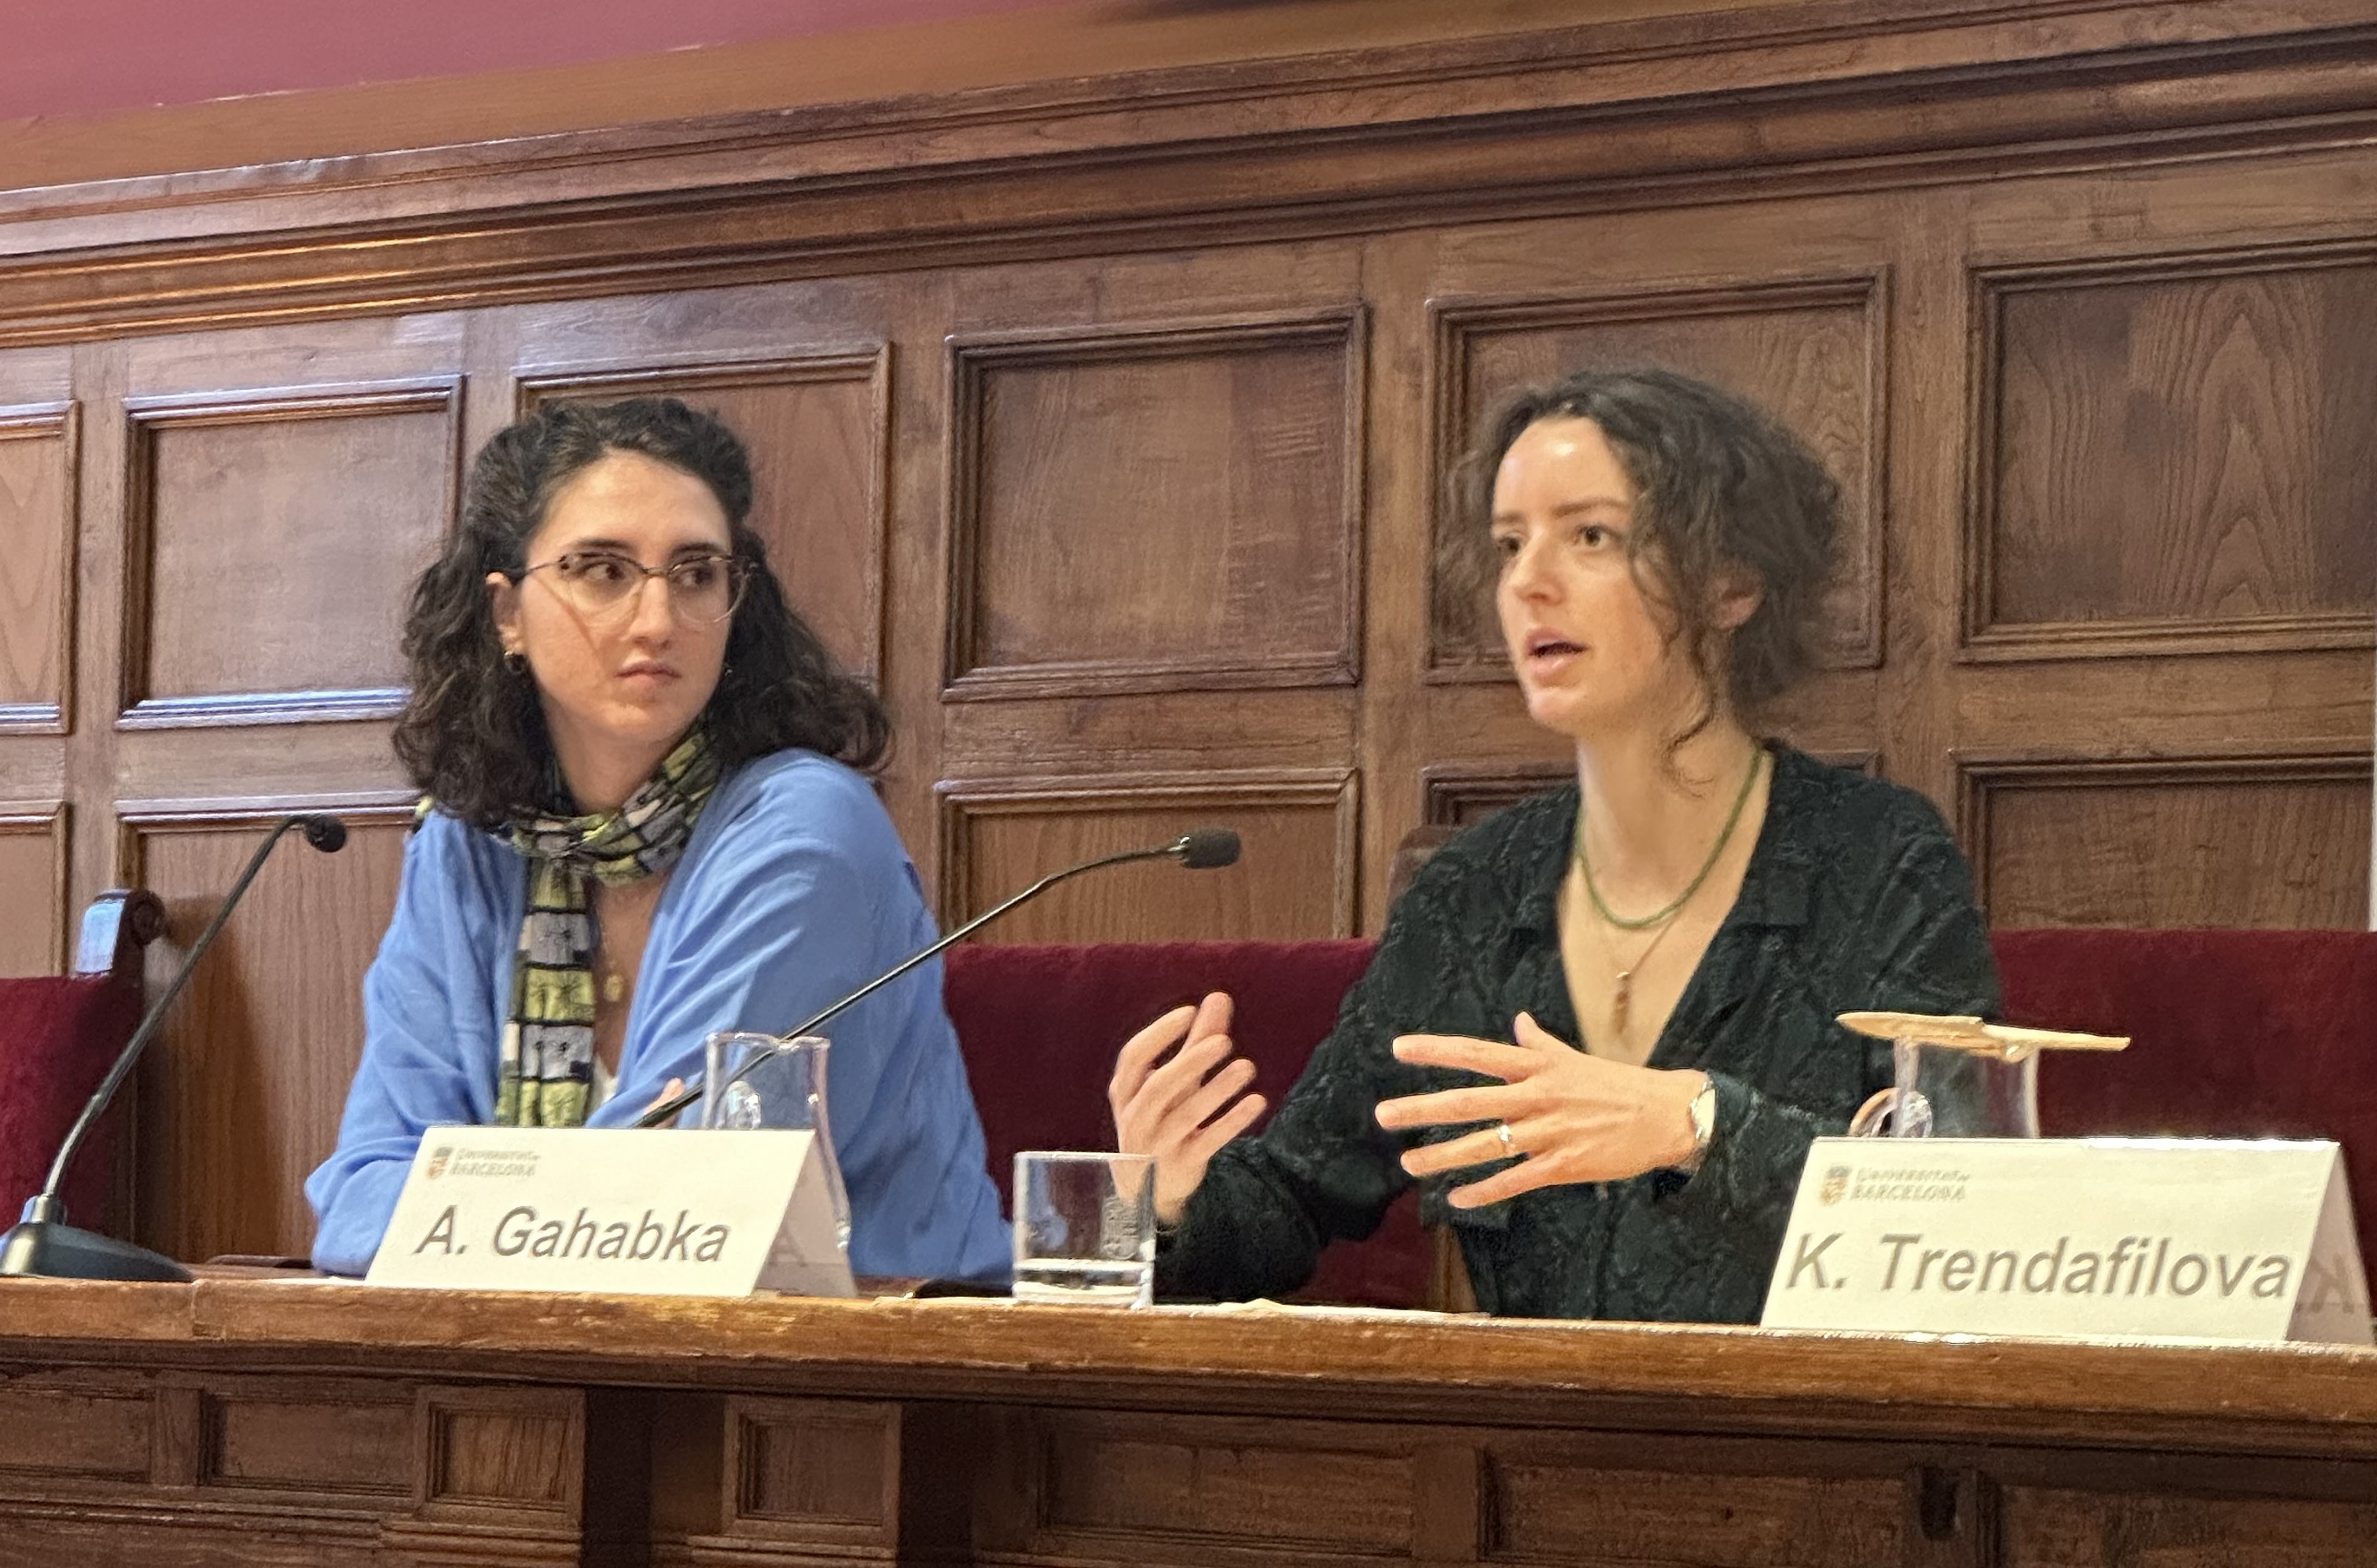 Photo: Alicia Gahabka (Germany) and Kristiana Qerosi (Italy) talking at the event as current students from the master's programme in Global Challenges for Sustainability. 